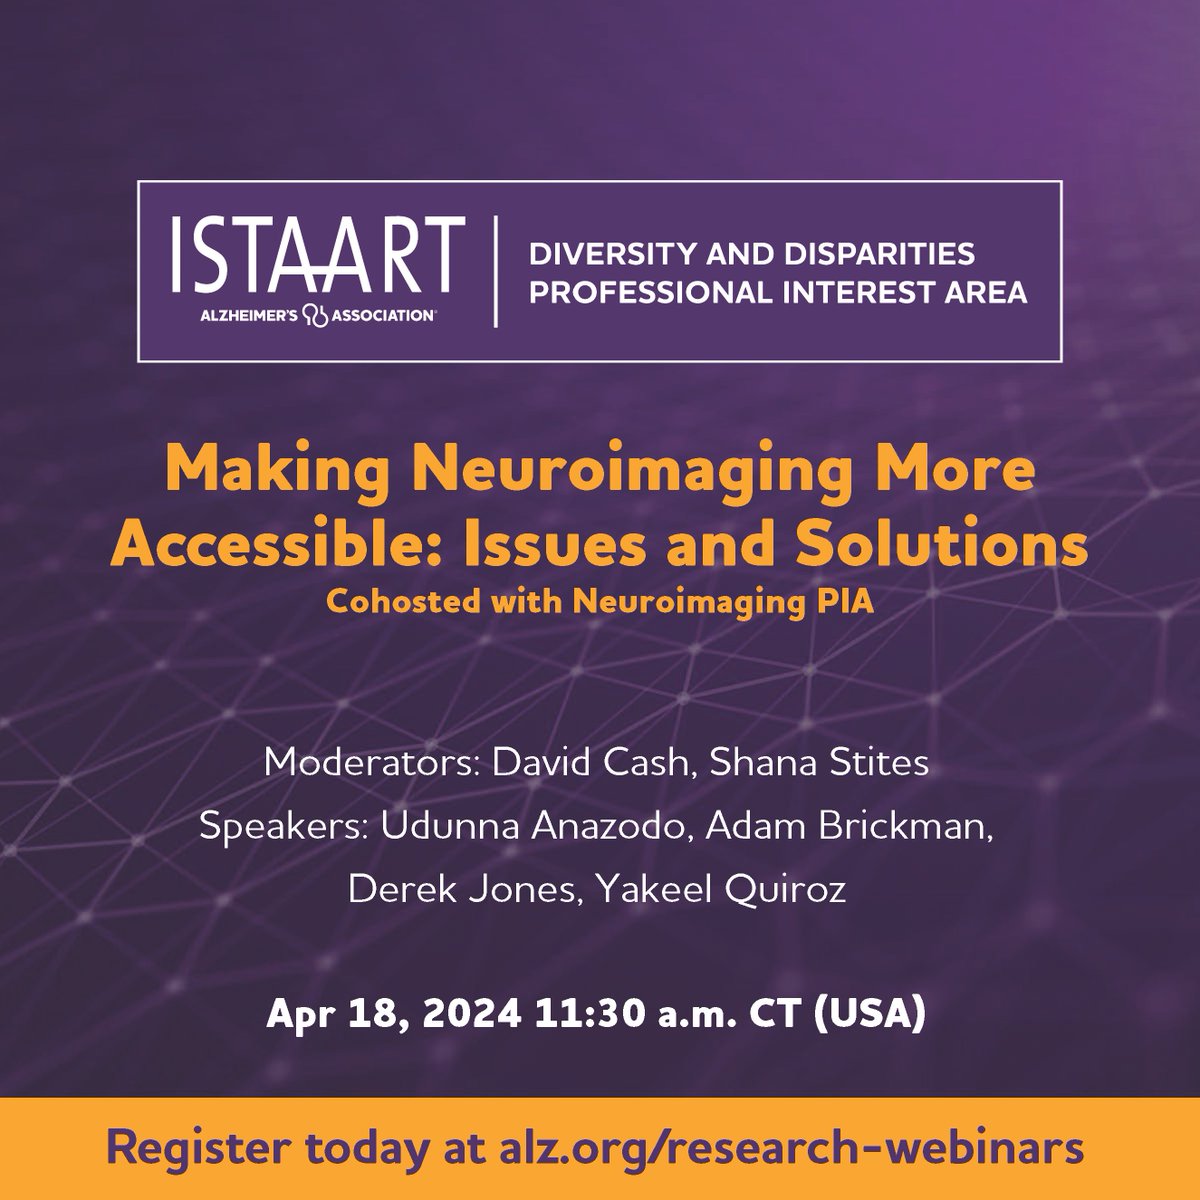 The next @ISTAART #NeuroimaingPIA and #DiversityPIA webinar on April 18th will focus on ways to make neuroimaging more accessible and facilitate equal health policies - join the discussion: 🗓️Date: April 18th 11.30 a.m. CT / 6.30 PM CET 💻Register: alz-org.zoom.us/webinar/regist…